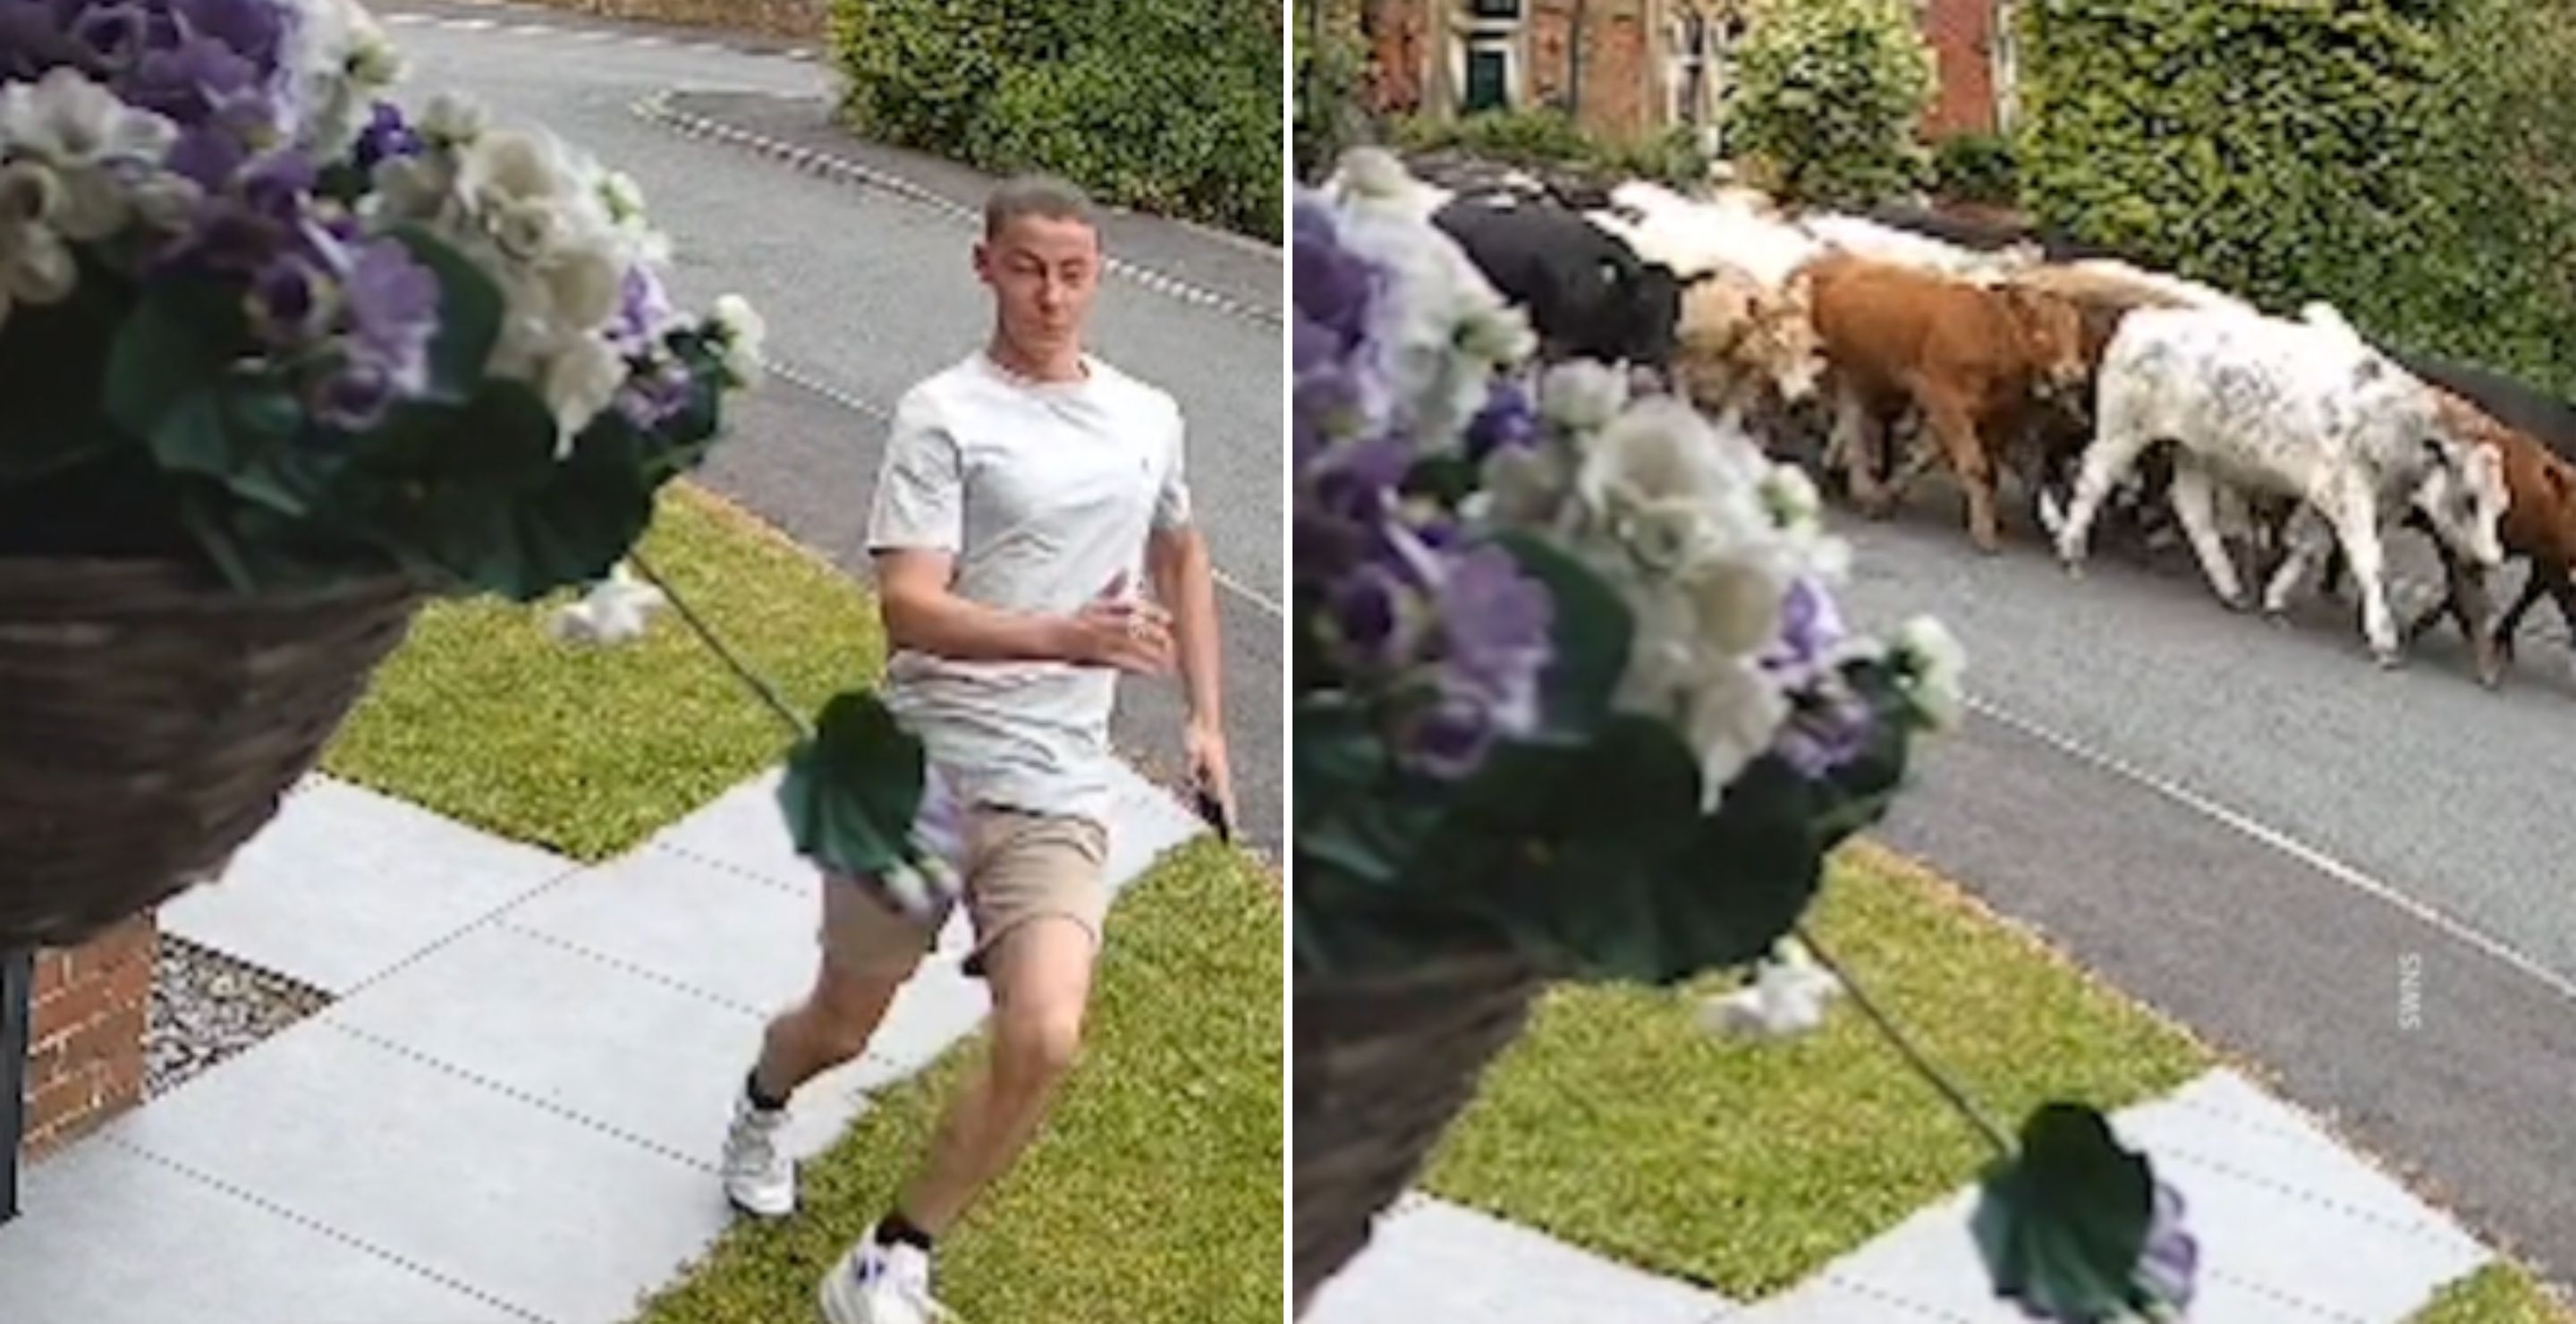 Watch A 16-Year-Old Teen Run For His Life From A Massive Herd Of Escaped Cows